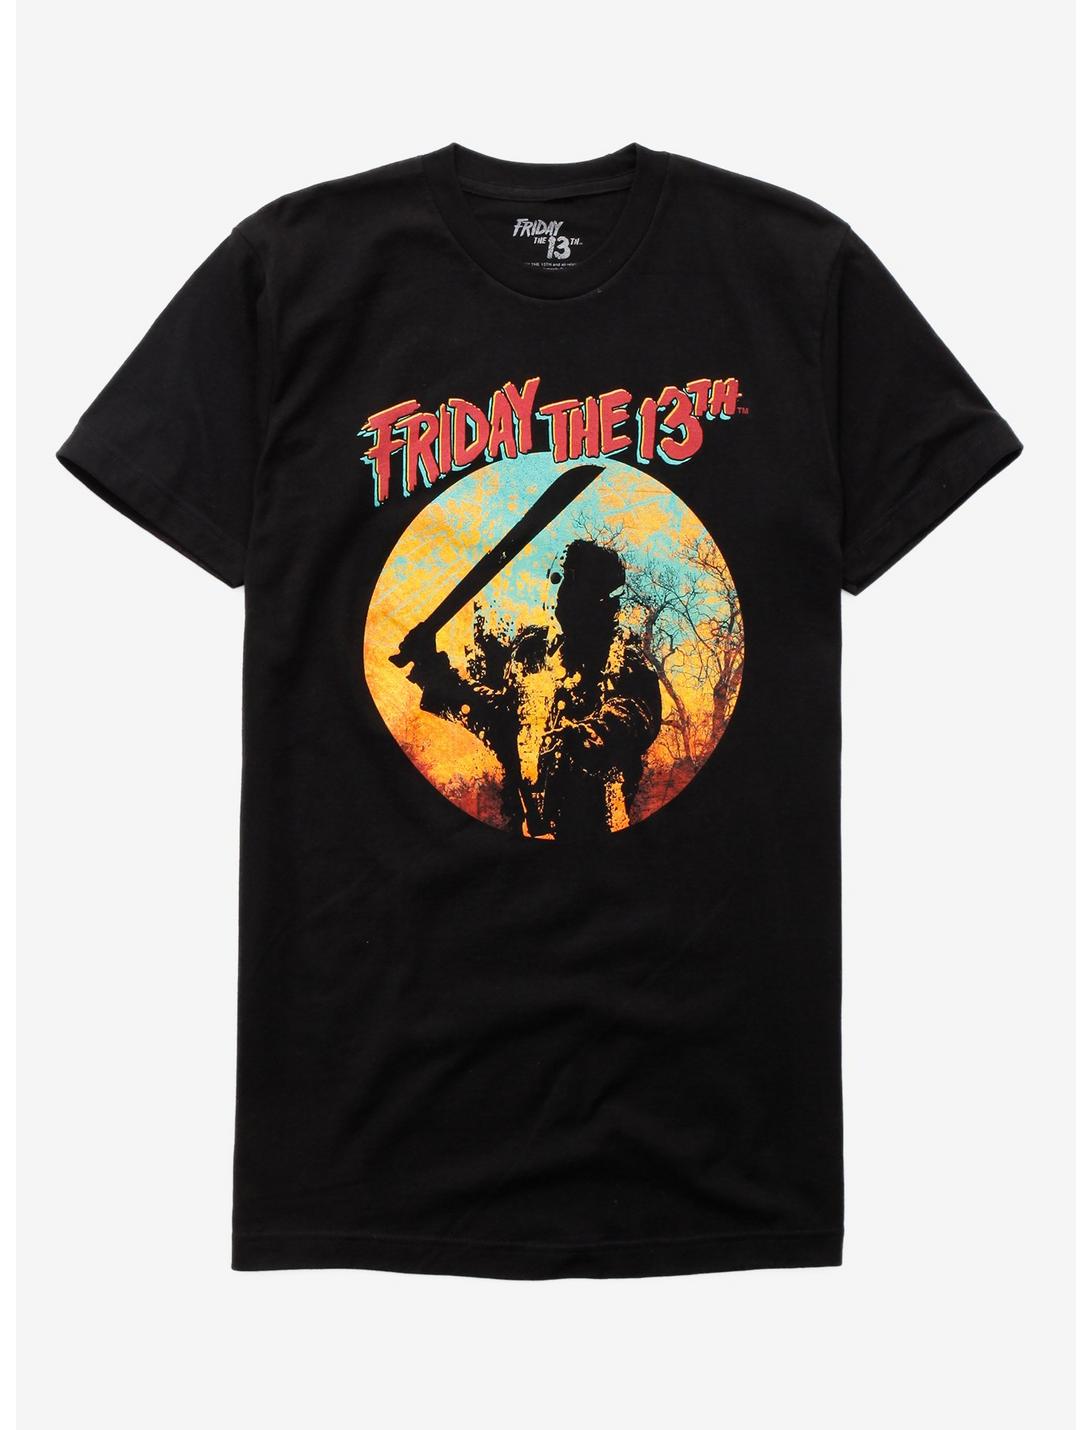 Friday The 13th Gradient Forest T-Shirt, BLACK, hi-res